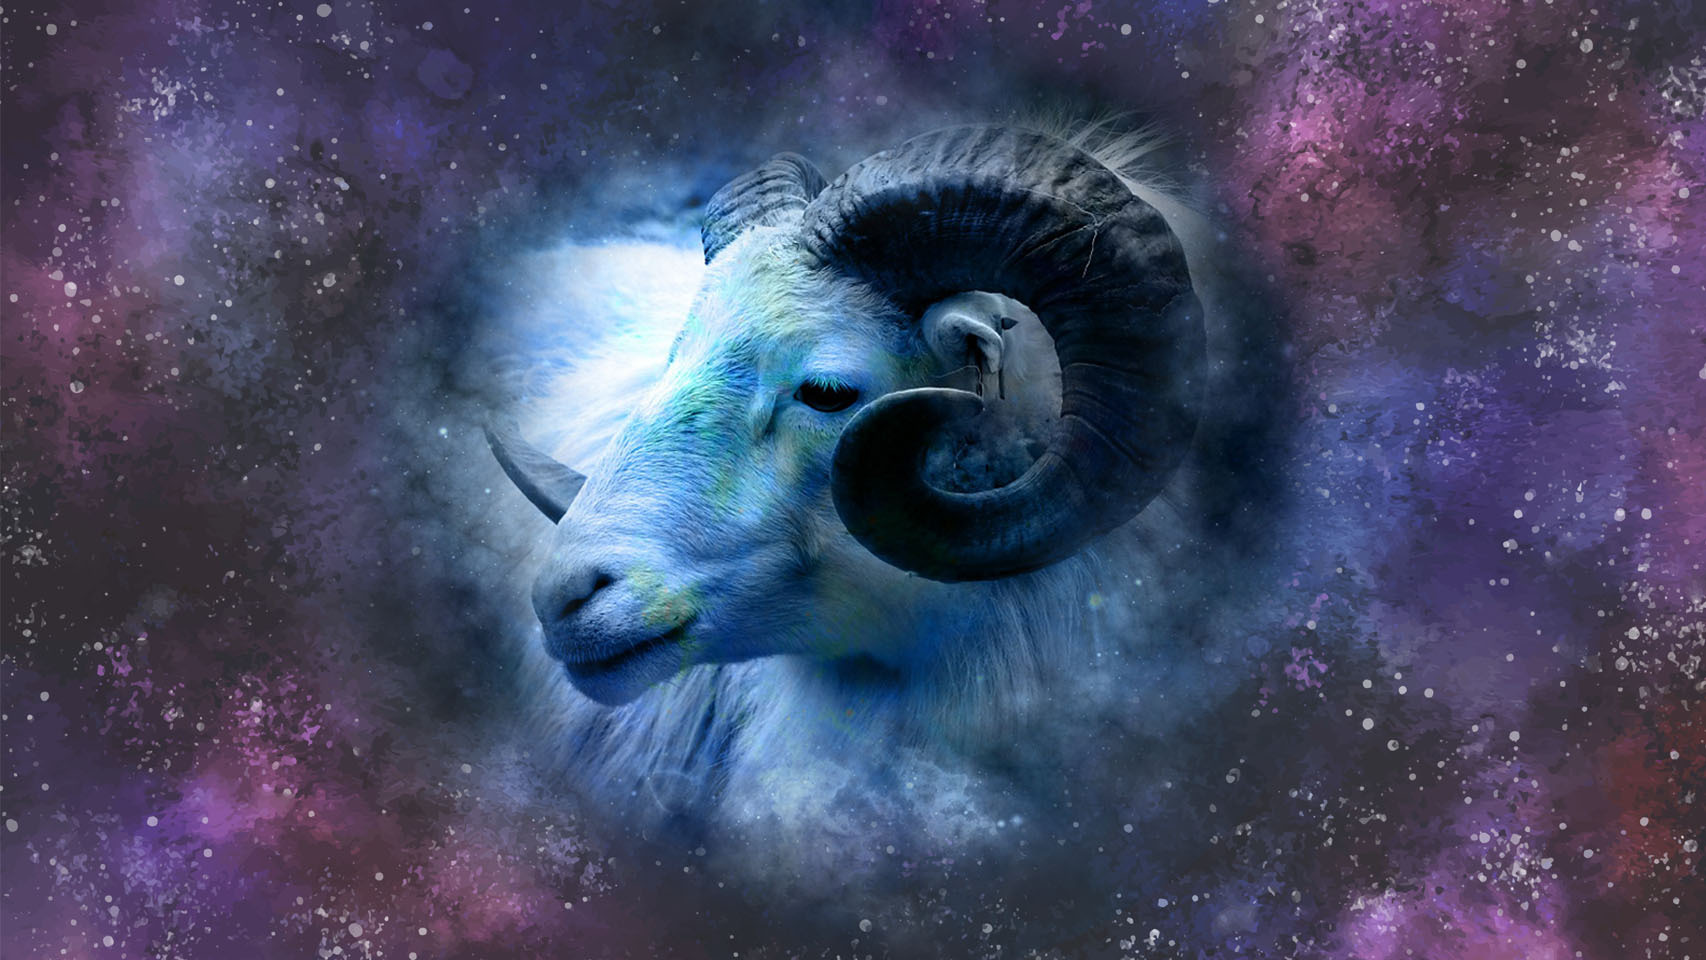 Aries sign "ram animal" in galaxy background